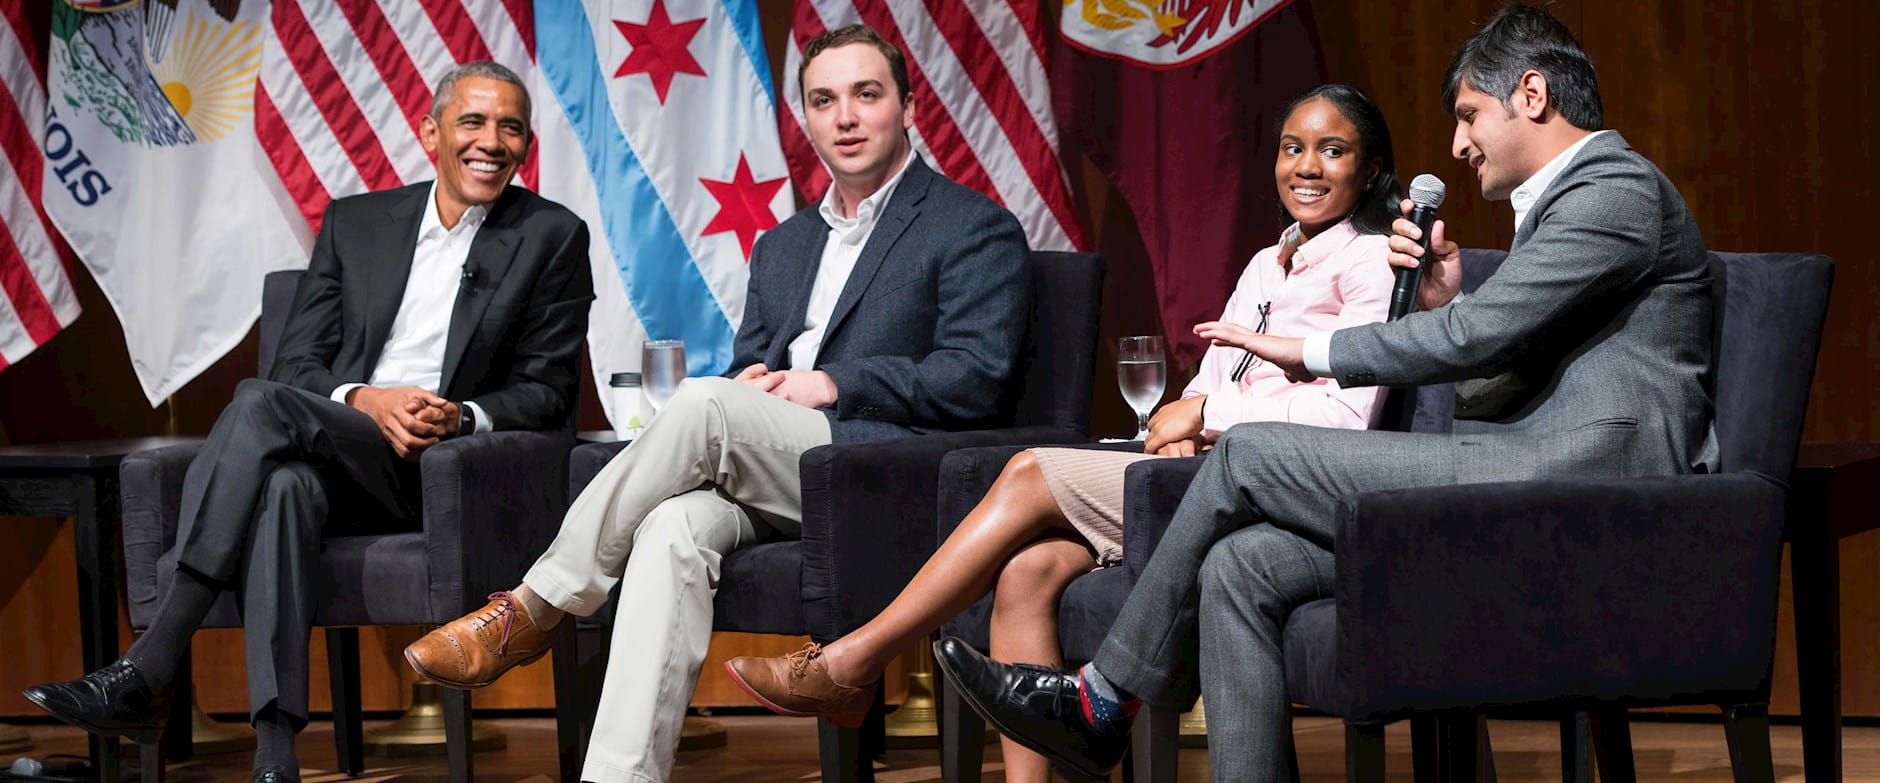 Barack Obama with a panel on stage